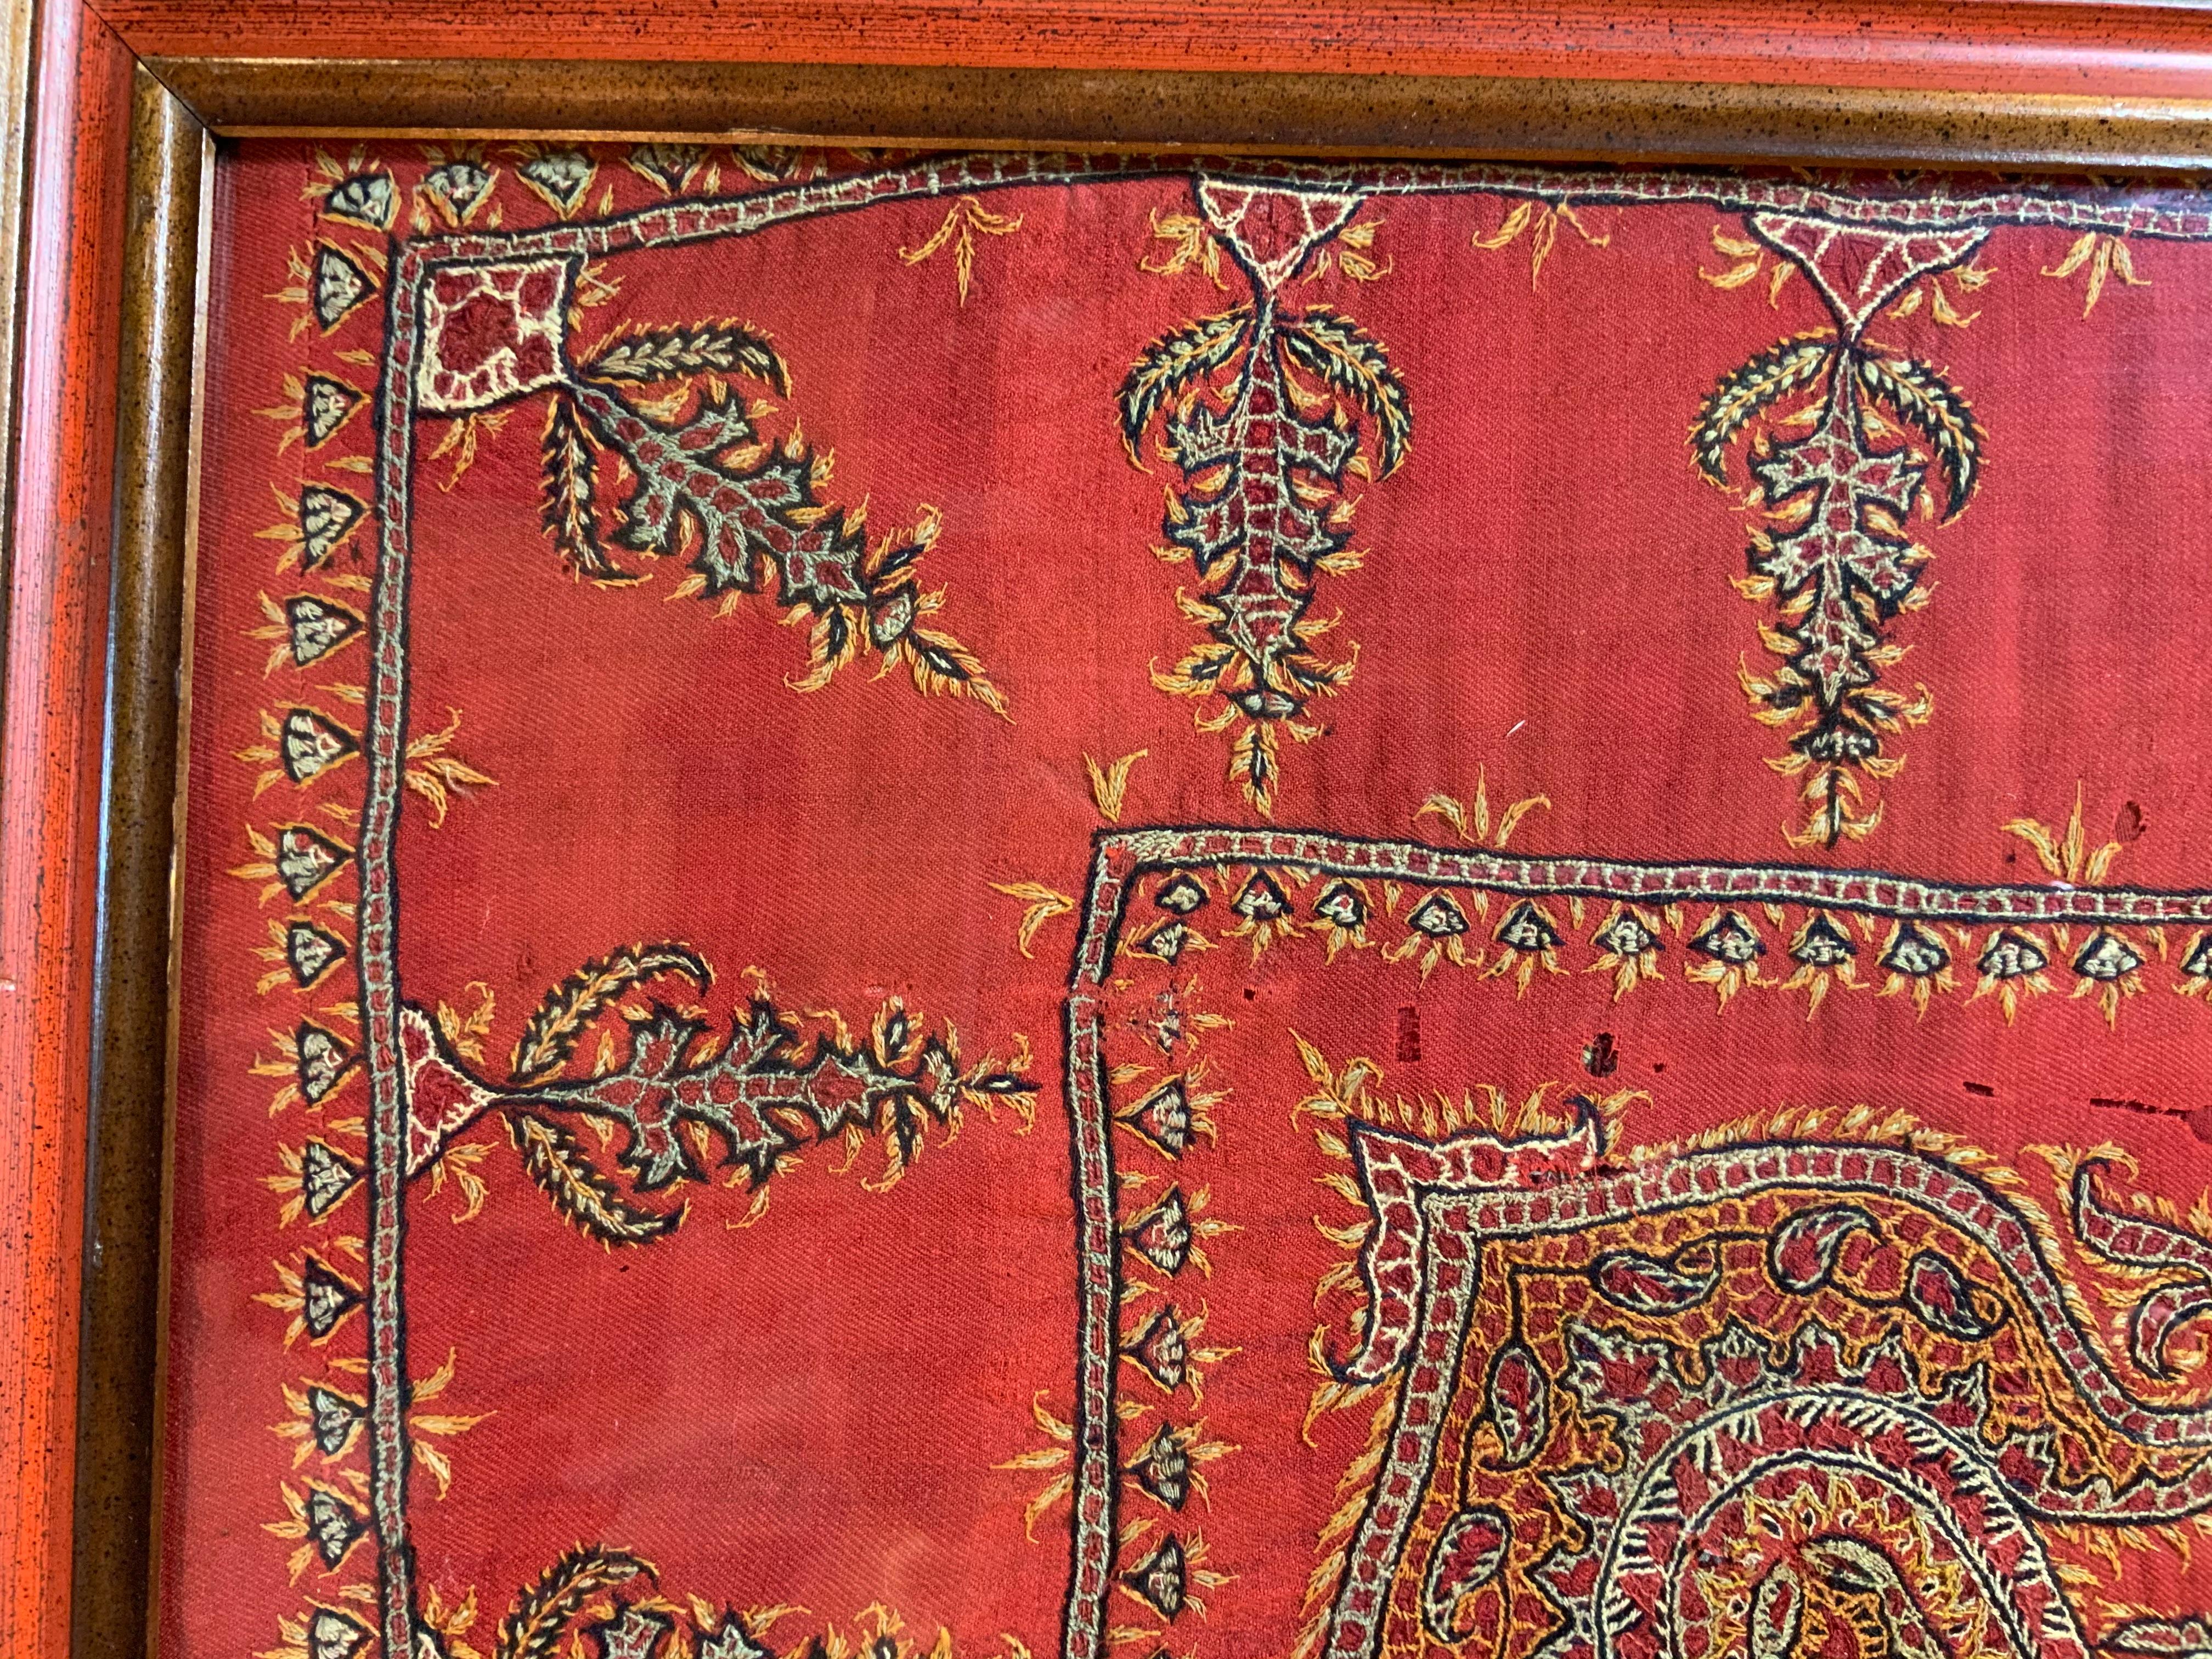 Early 20th Century Hand Embroidery Suzani Wall Hanging 8